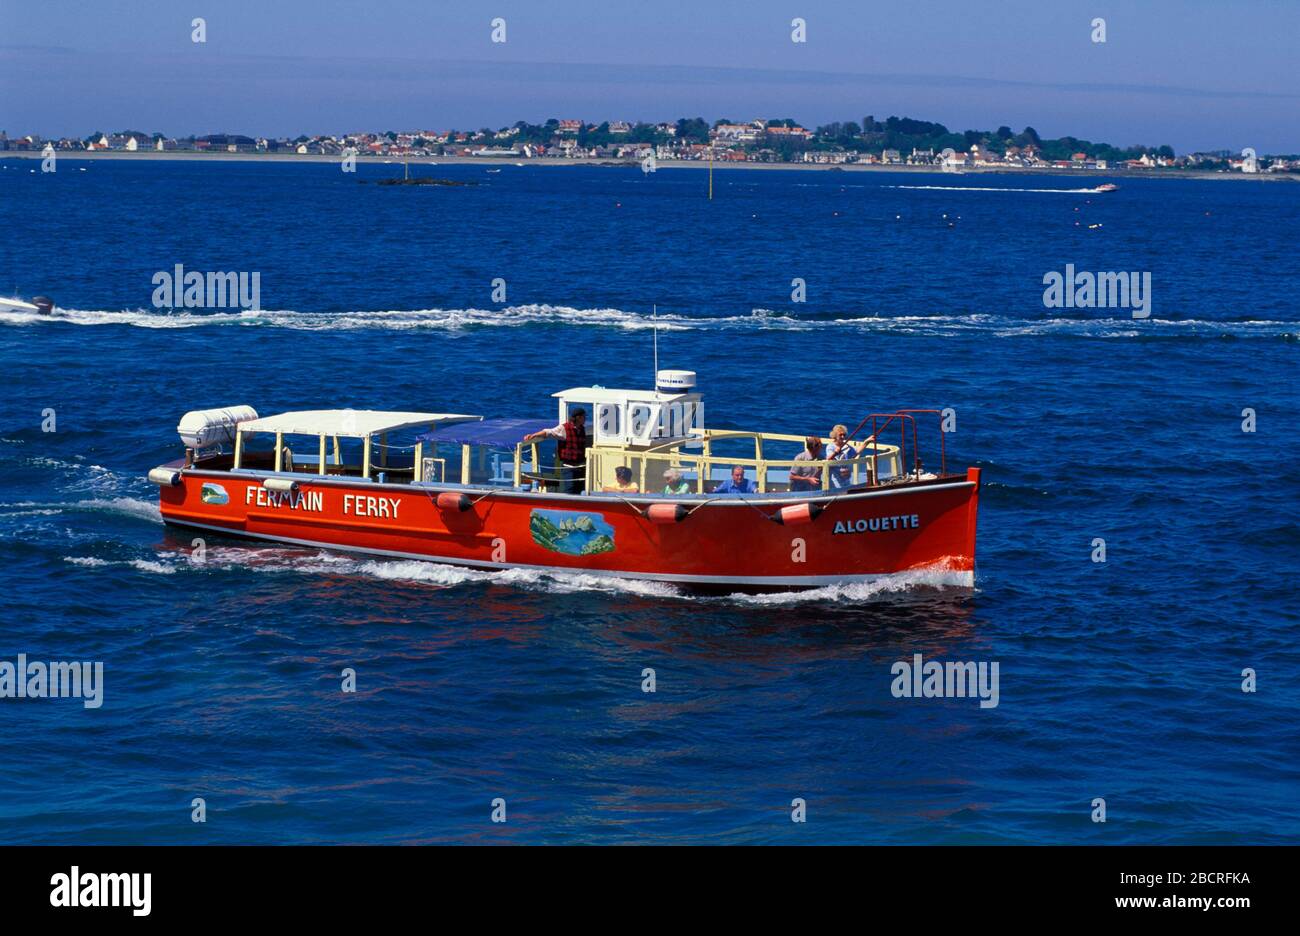 Tourist cruise ship  ALOUETTE, Guernsey, Channel Islands, Great Britain, Europe Stock Photo